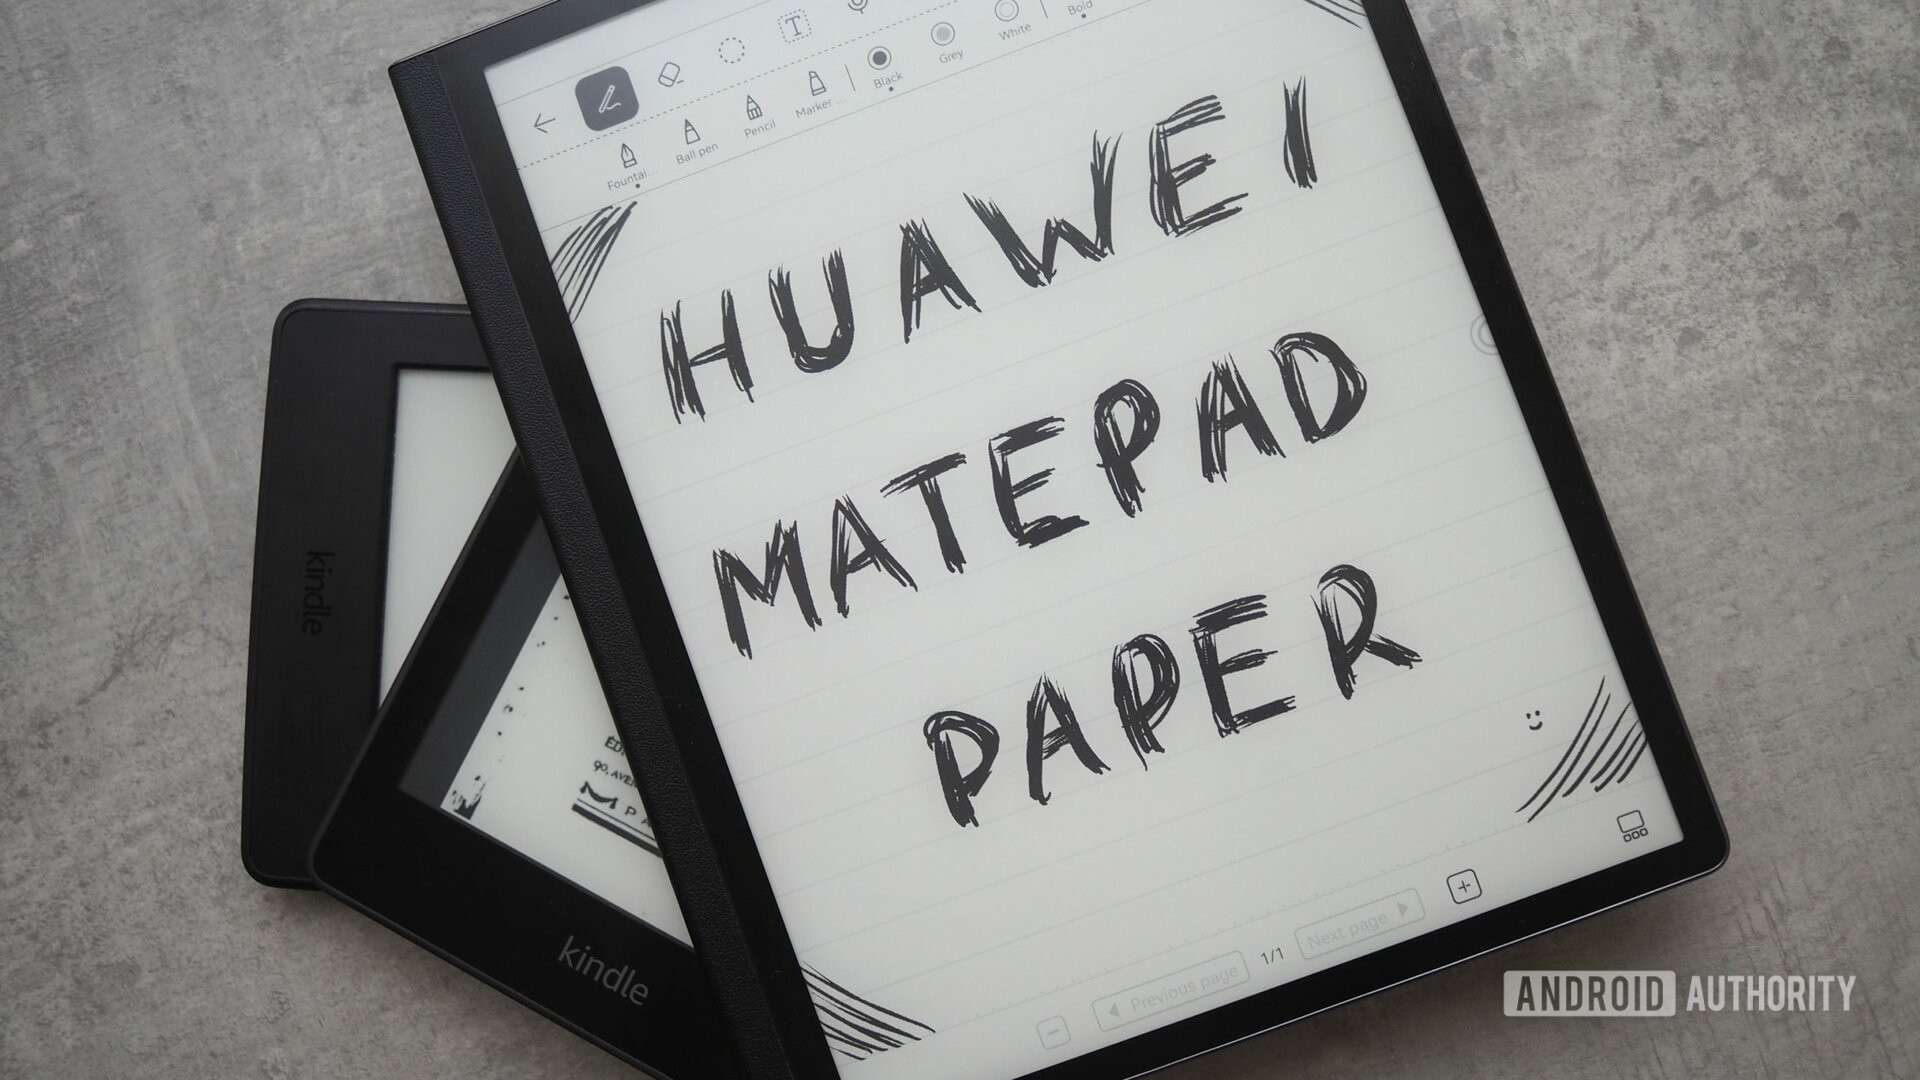 HUAWEI MatePad Paper with a sketched note showing the name of the device, on top of two other Amazon Kindles